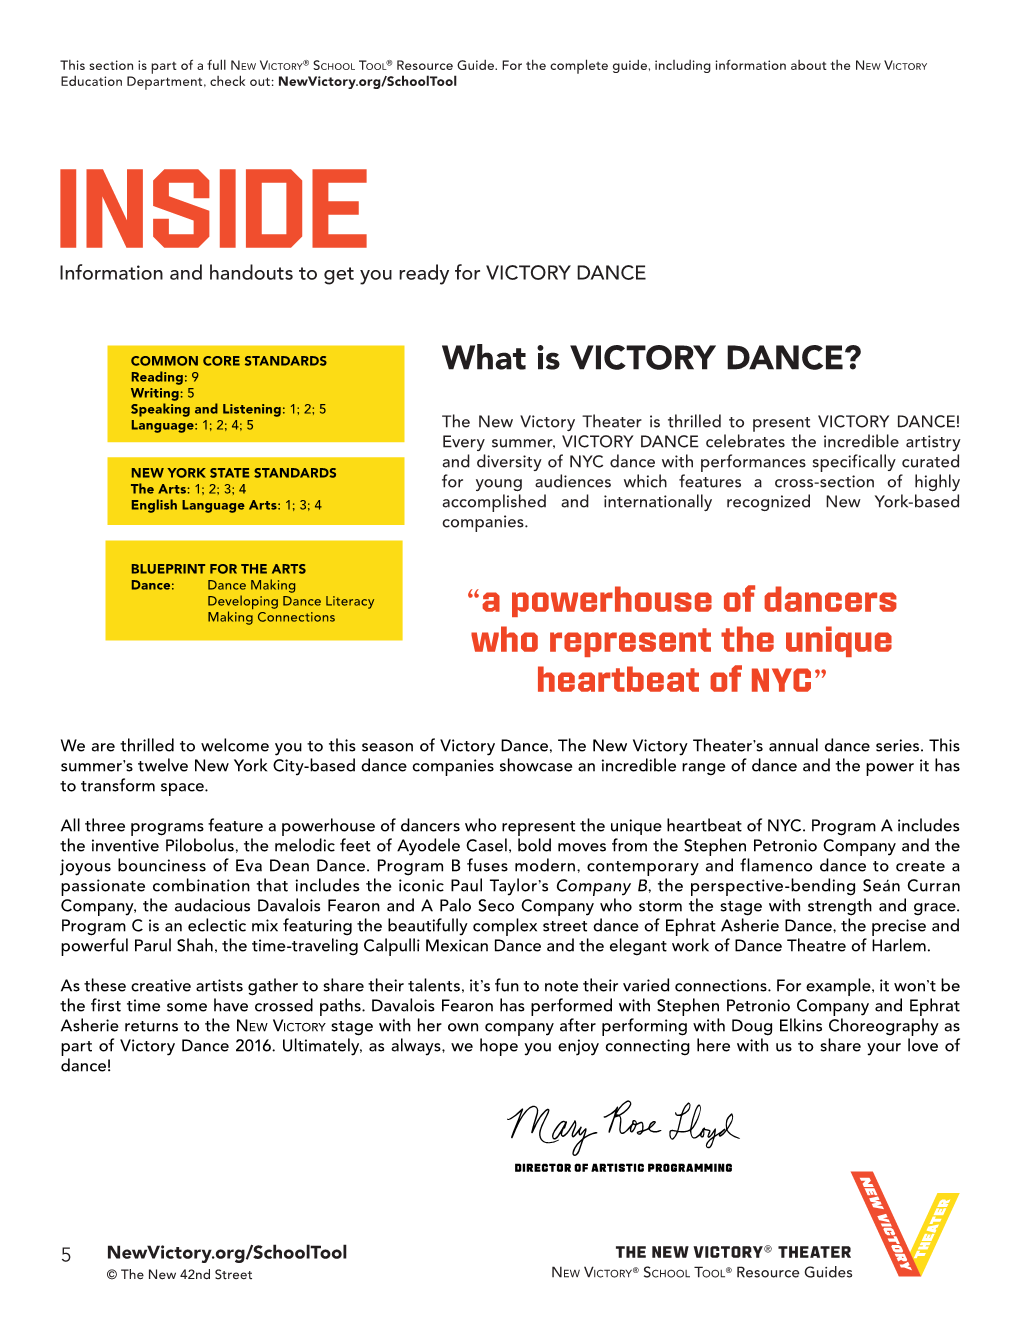 INSIDE Information and Handouts to Get You Ready for VICTORY DANCE